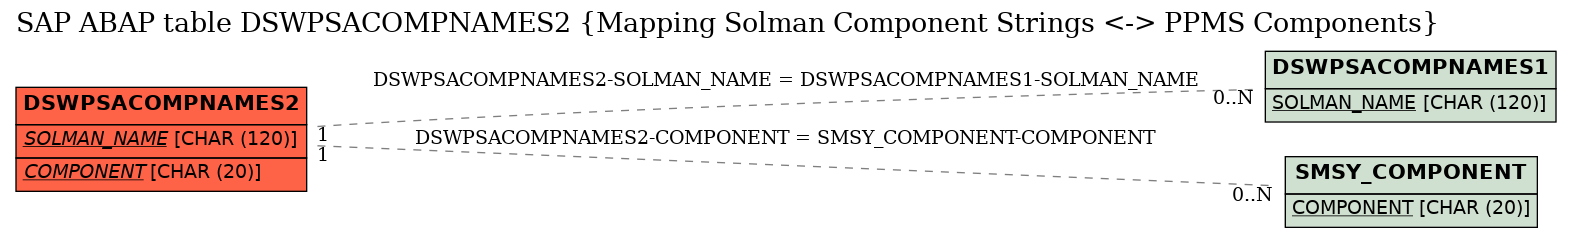 E-R Diagram for table DSWPSACOMPNAMES2 (Mapping Solman Component Strings <-> PPMS Components)